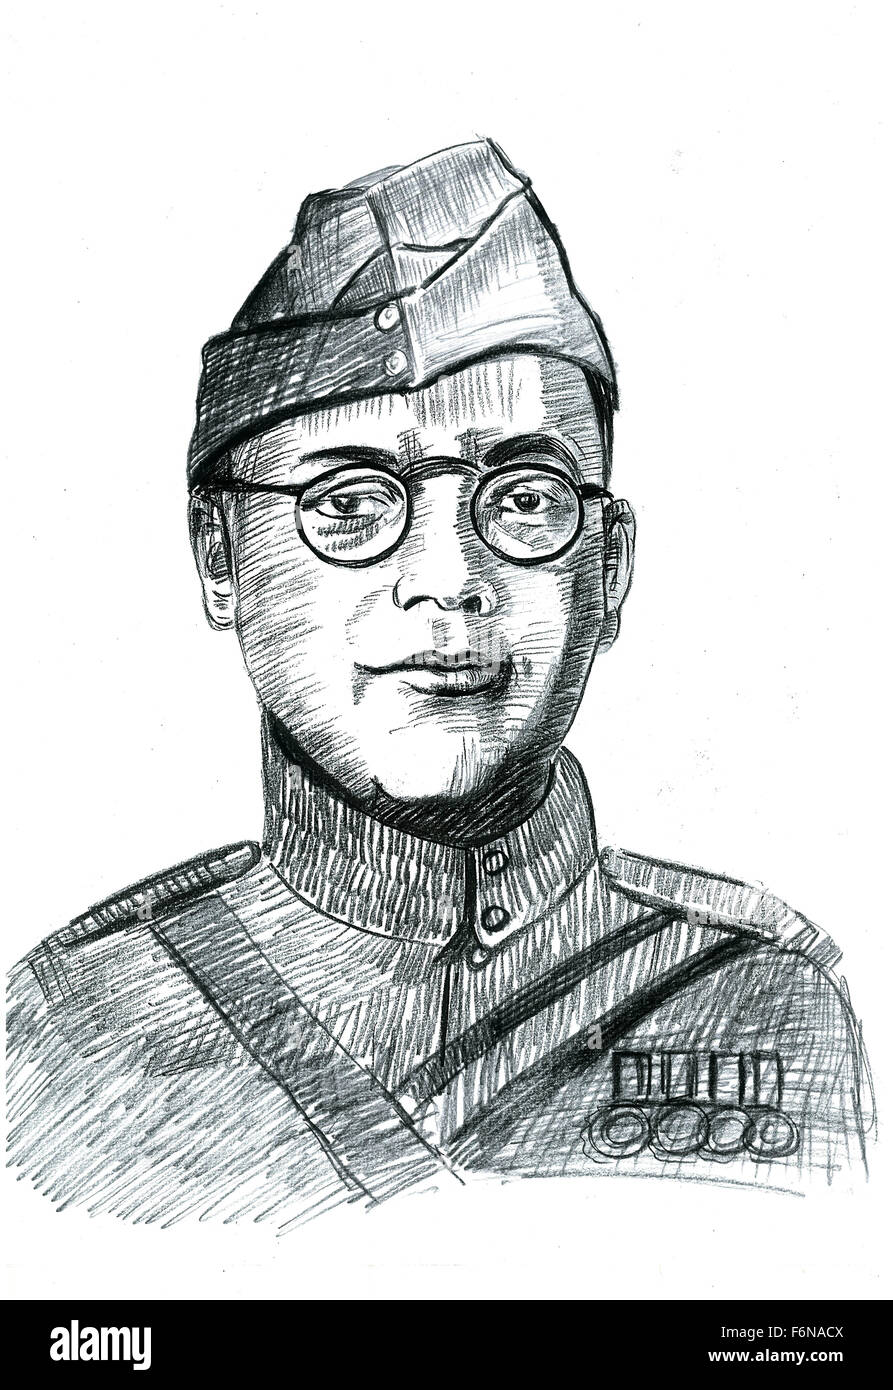 Subhash chandra bose Cut Out Stock Images & Pictures - Alamy